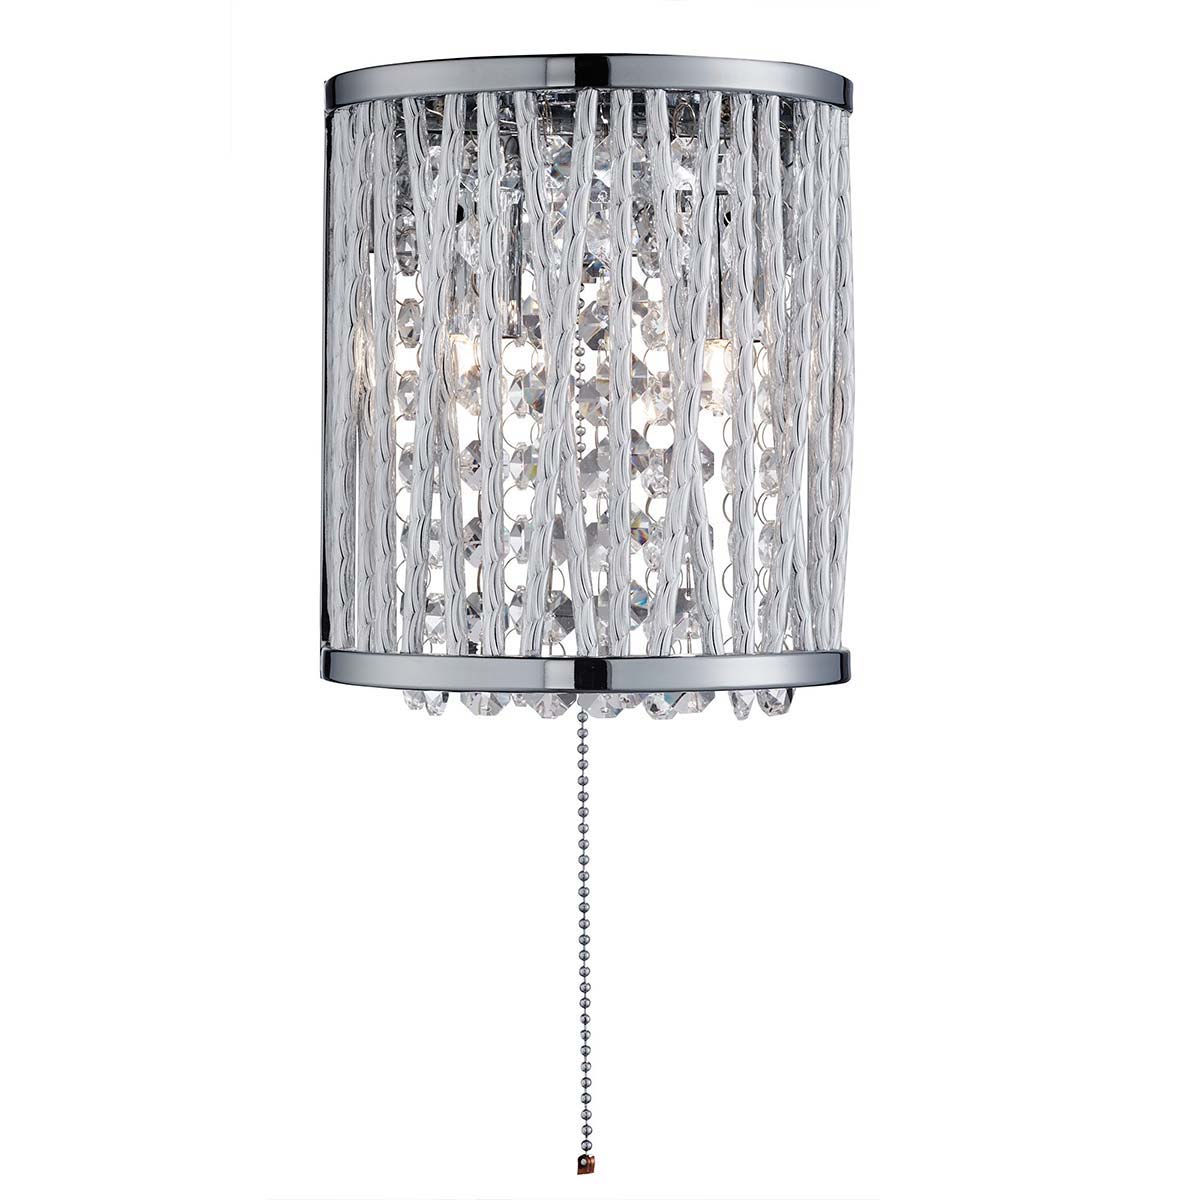 Elise 2 Light Switched Wall Light Chrome Crystal Glass